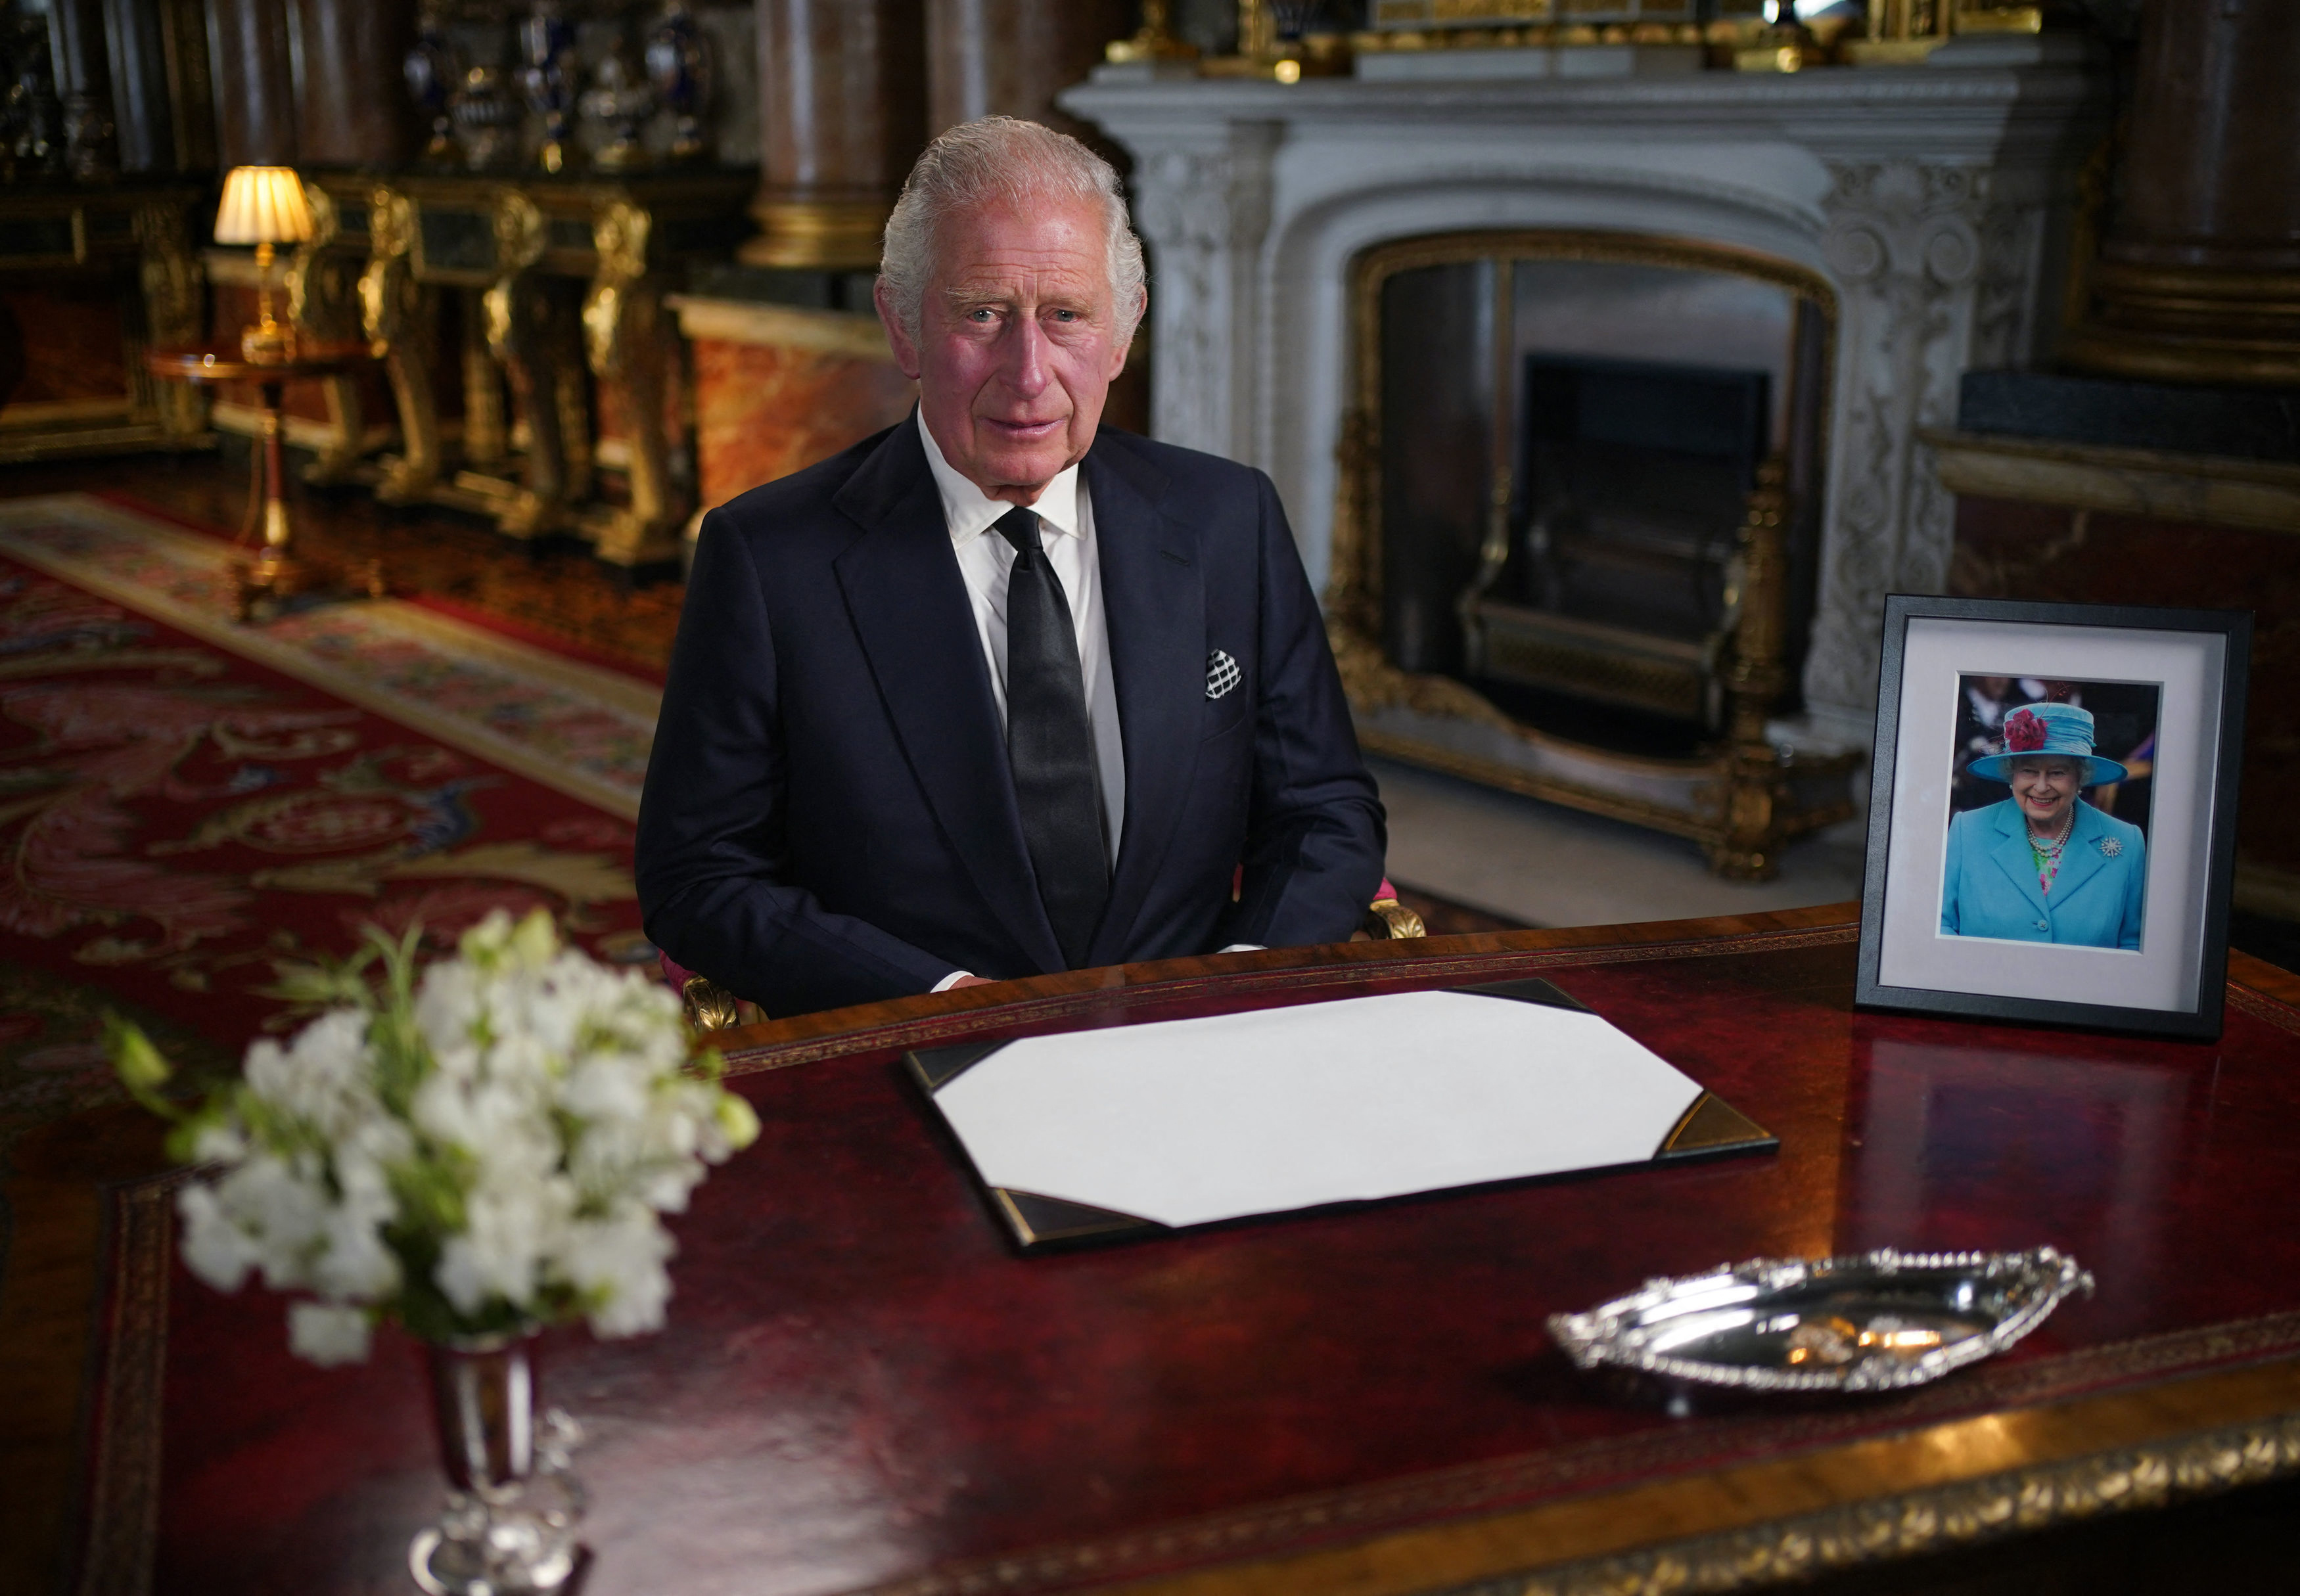 King Charles sits behind a desk with flowers and a picture of the late queen on it as he makes his televised speech.